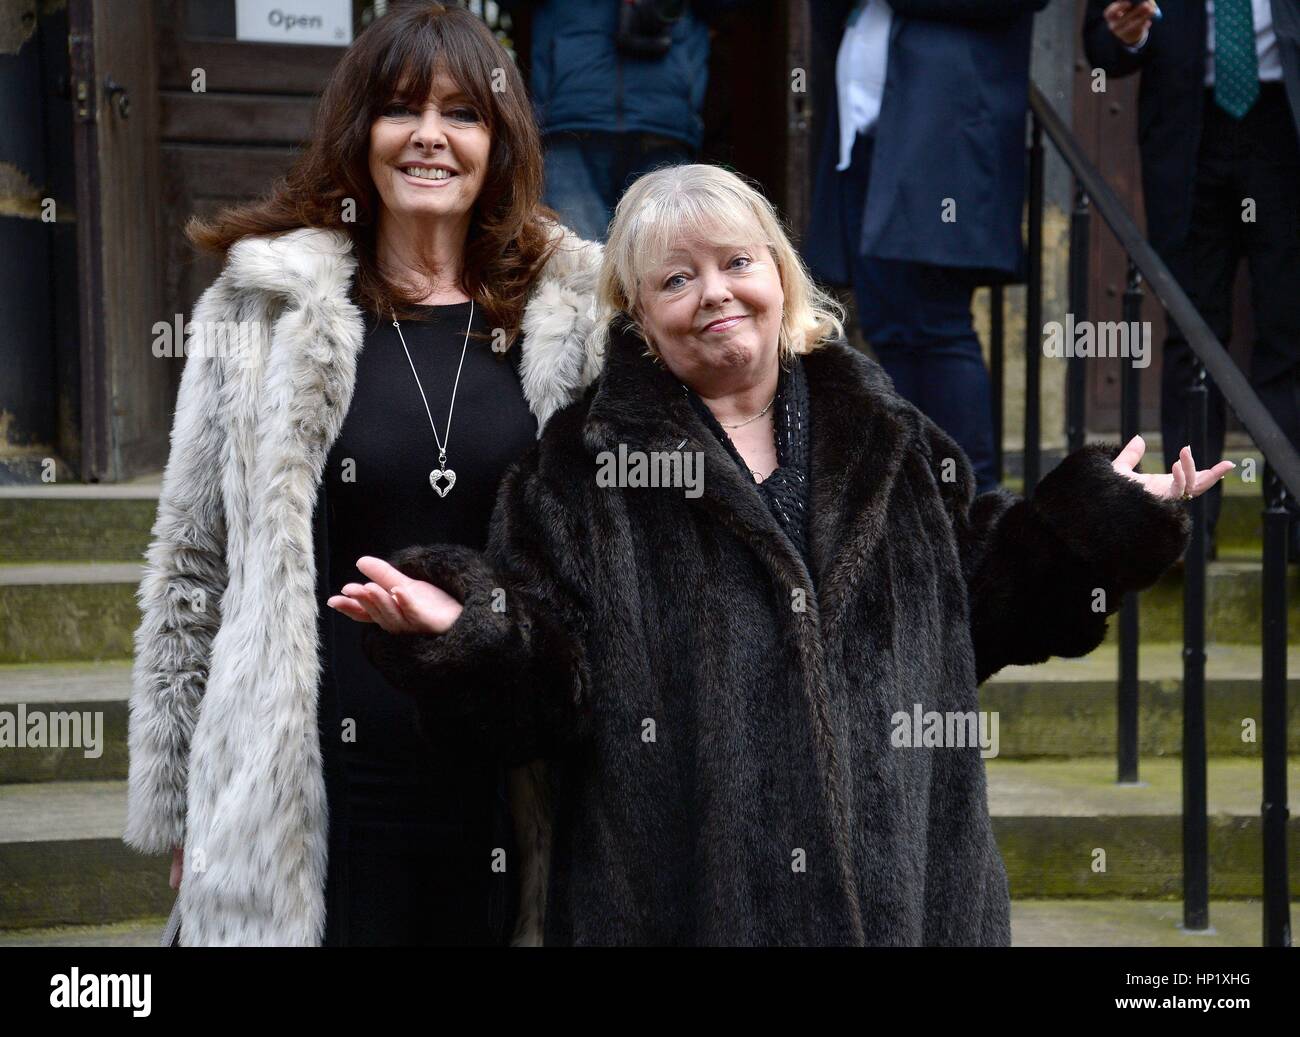 RETRANSMITTED CORRECTING THE SPELLING OF GORDON TO GORDEN Actresses Vicki Michelle (left) and Sue Hodge arrive for the funeral of 'Allo 'Allo star Gorden Kaye at Huddersfield Parish Church. Stock Photo